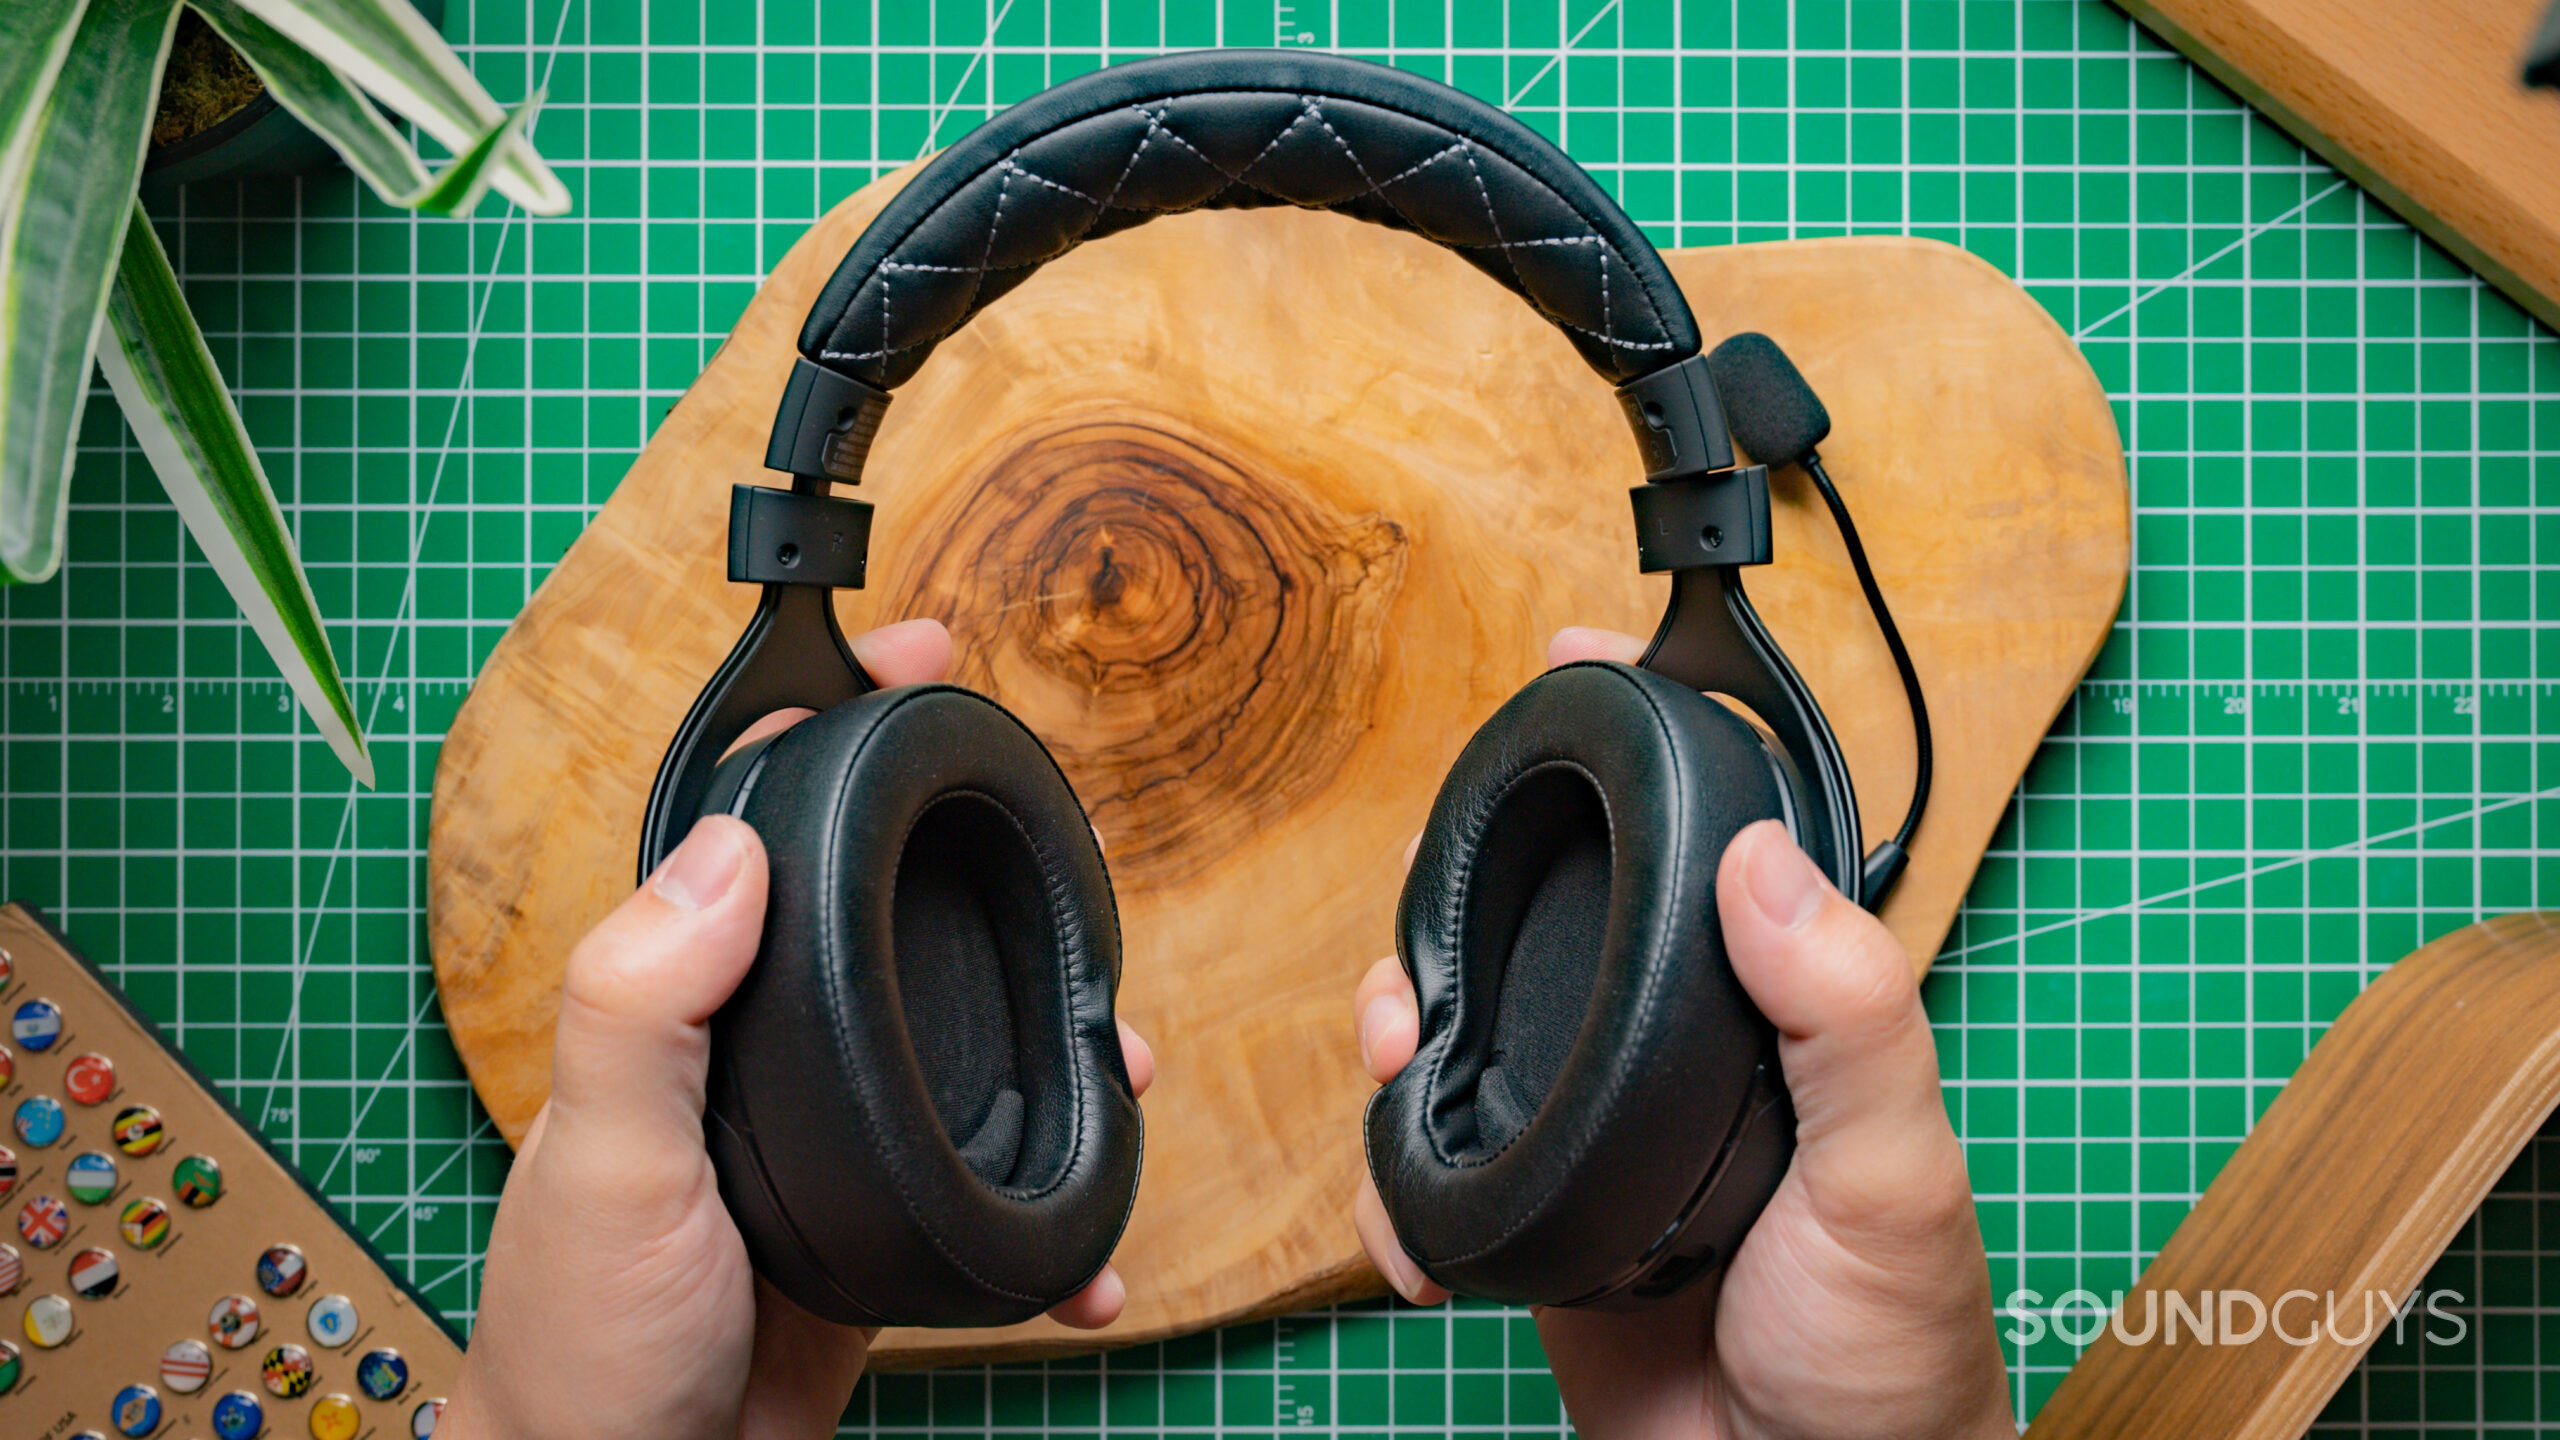 The Corsair HS70 Pro Wireless being held in two hands against a wood backdrop on top of a green table.